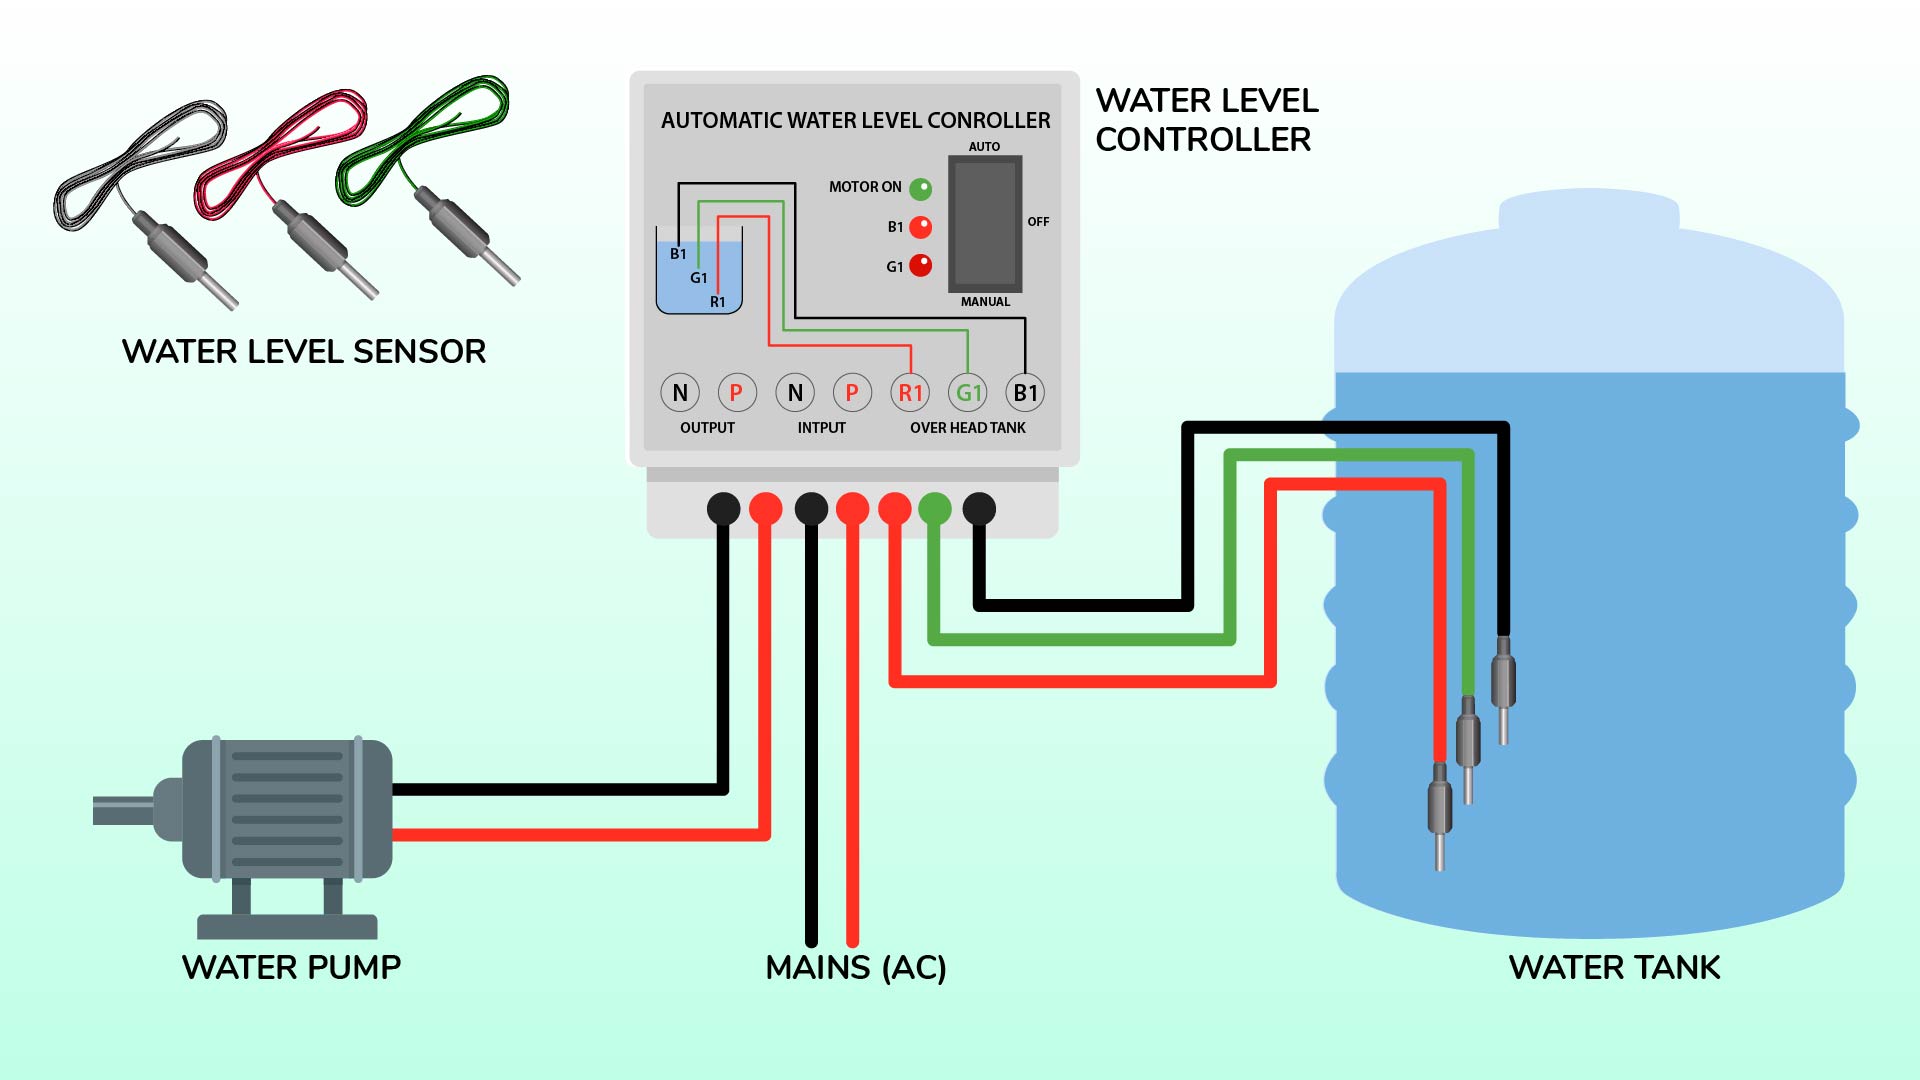 Water level controller & how it works